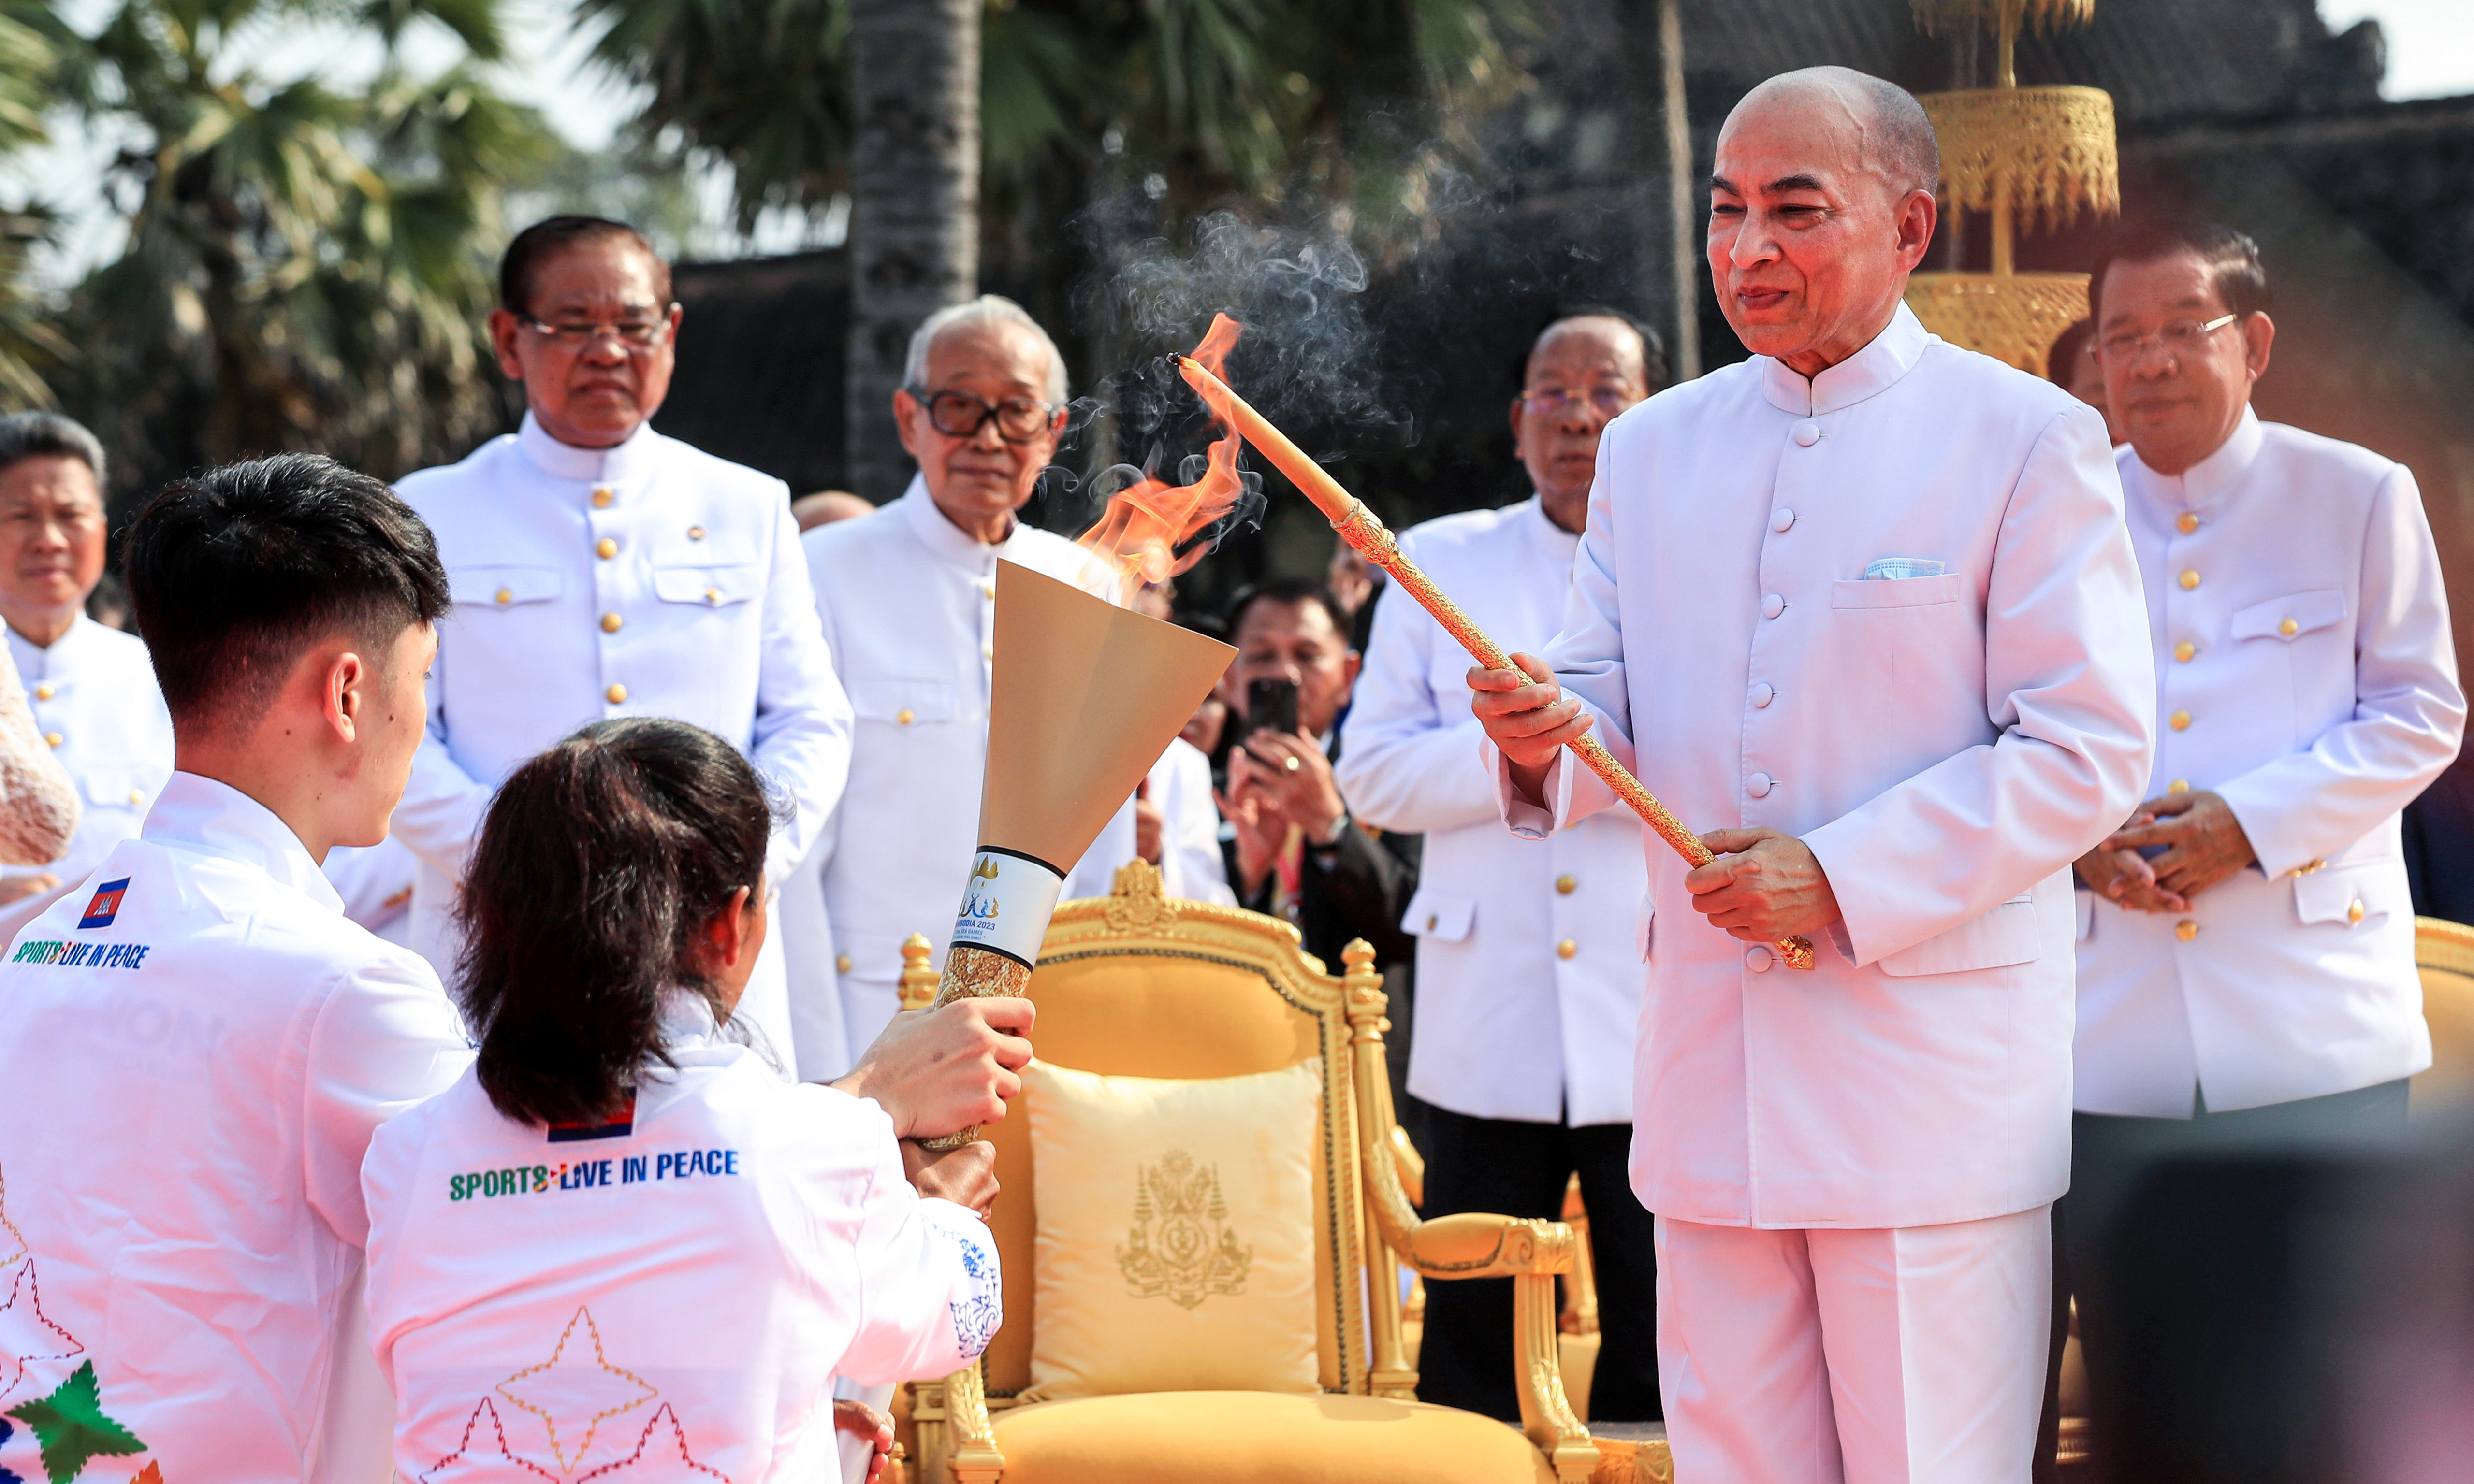 SIEM REAP PROVINCE: Cambodiaís King Norodom Sihamoni (2nd right) lights the torch with a candle lit from the sunís rays as Prime Minister Hun Sen (right) looks on during a ceremony prior to the 32nd SEA Games at Angkor Wat temple in Siem Reap province.- AFP